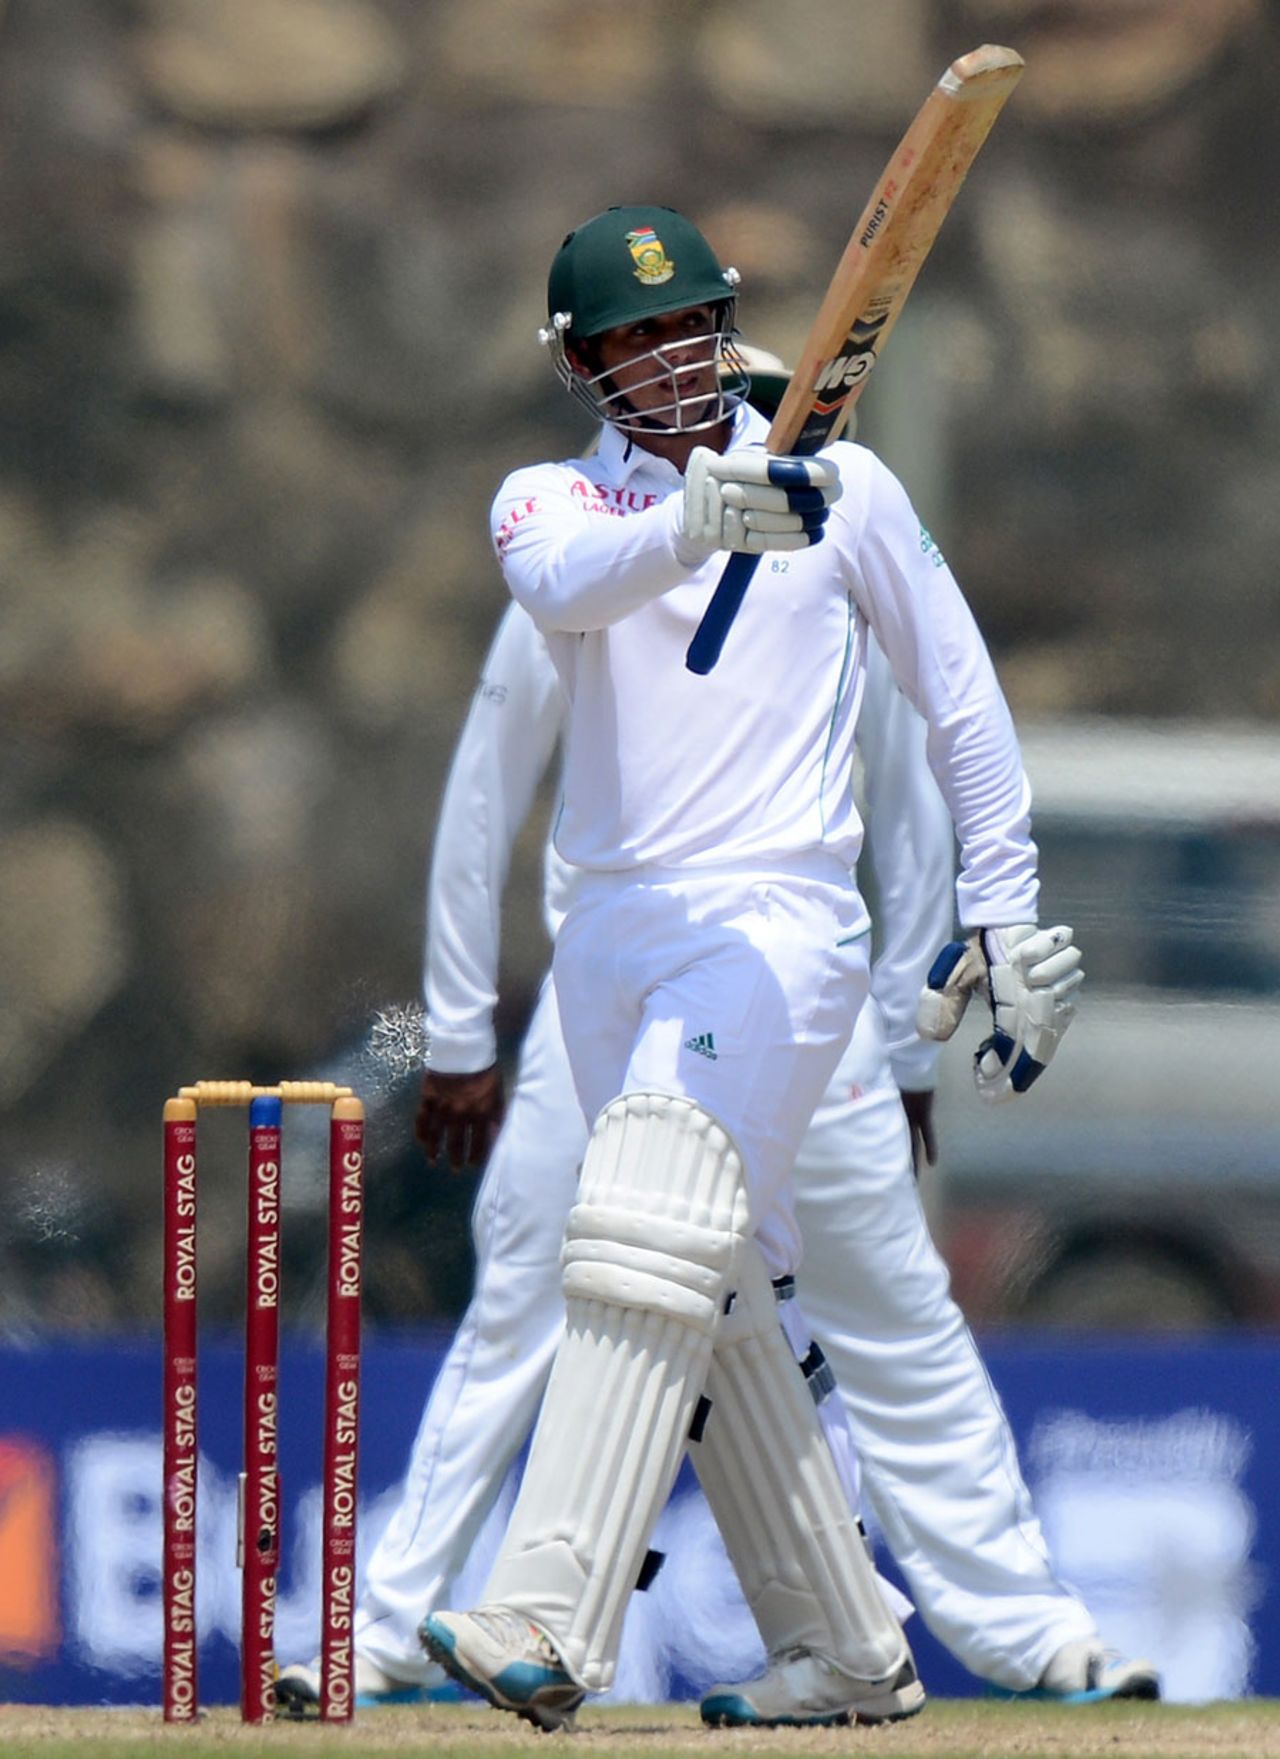 Quinton de Kock raises his bat after scoring a fifty, Sri Lanka v South Africa, 1st Test, Galle, 2nd day, July 17, 2014